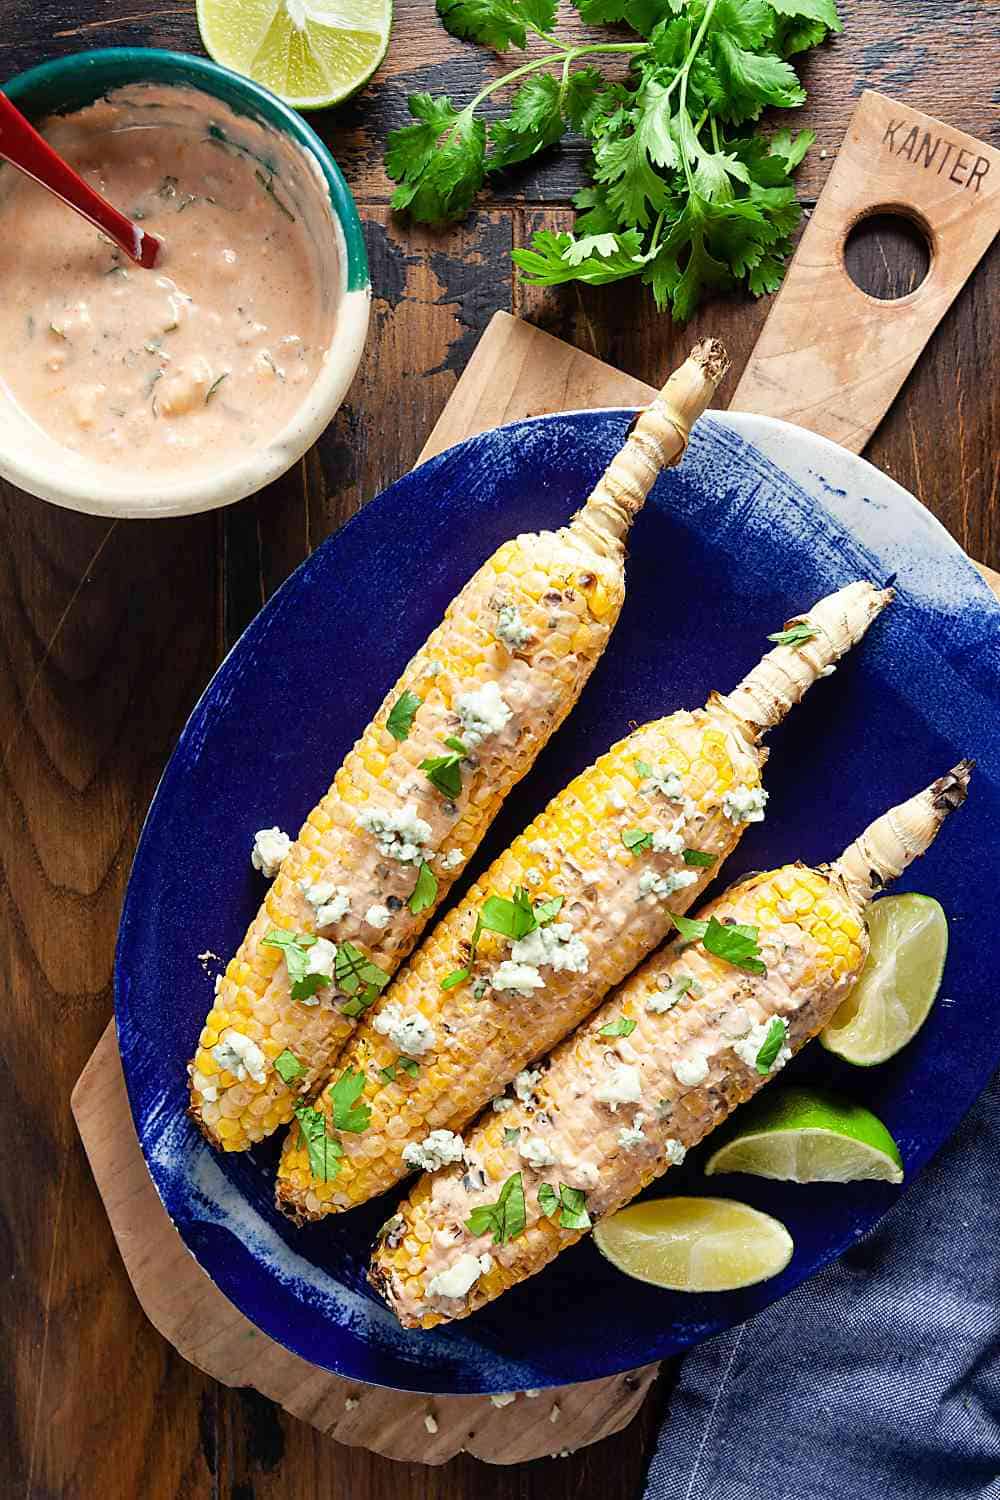 Dress up your grilled corn with a creamy mix of yogurt, wing sauce, and blue cheese for a summer side dish that’ll make your taste buds dance!